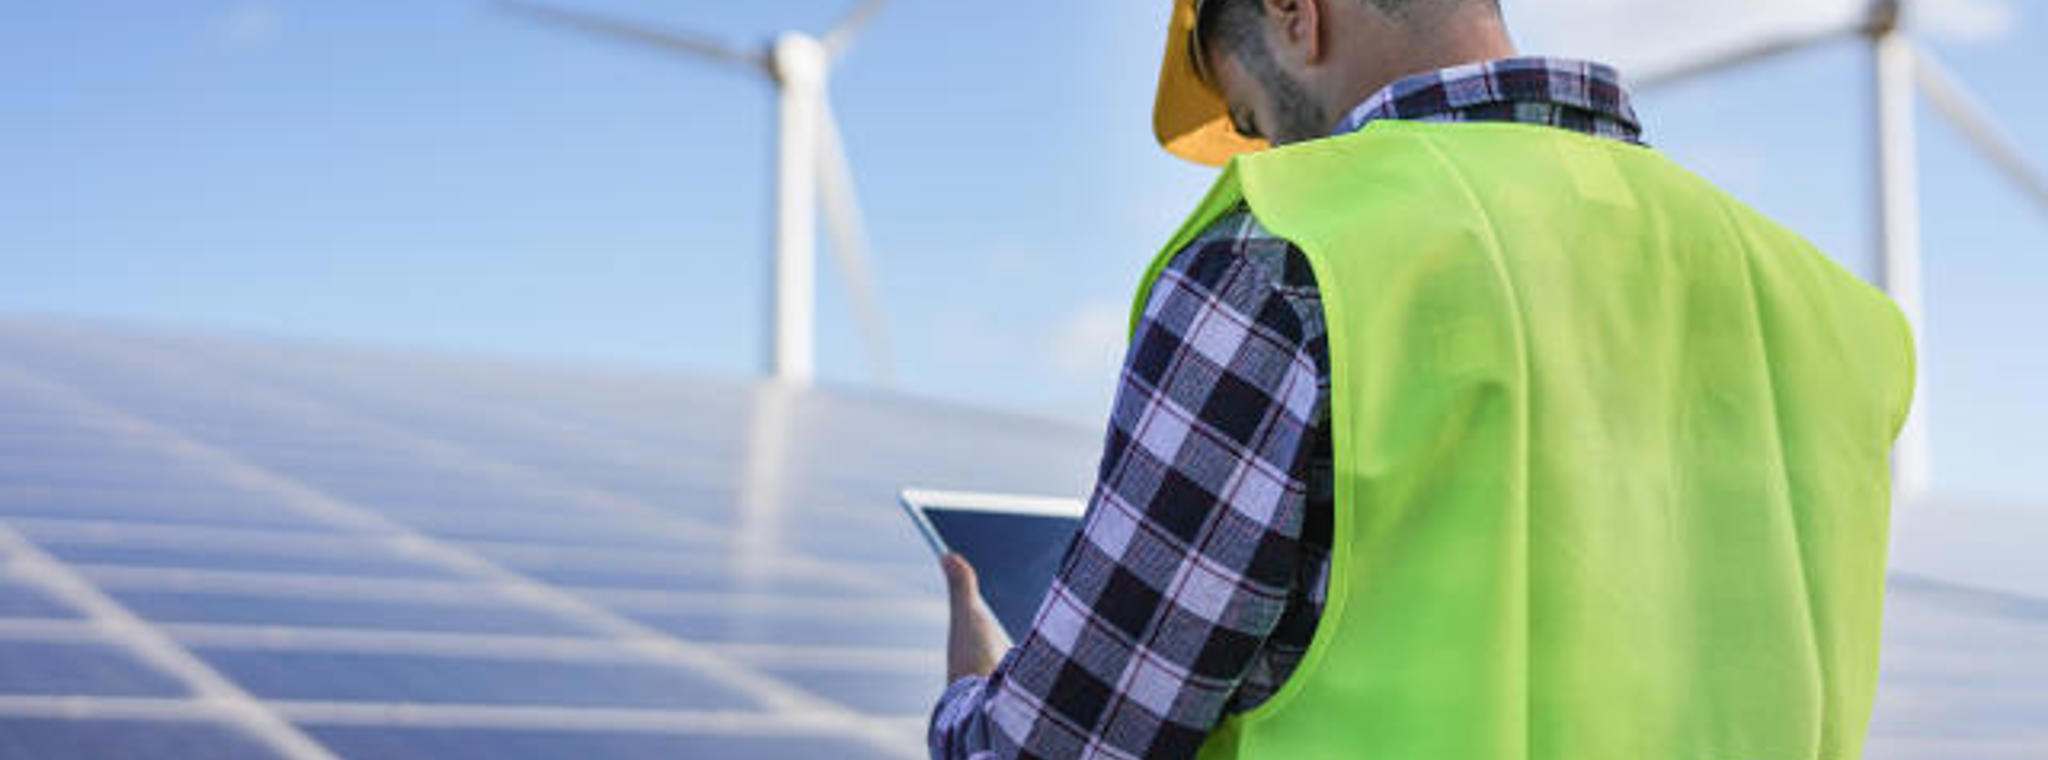 Person working at a wind farm wearing hi vis jacket